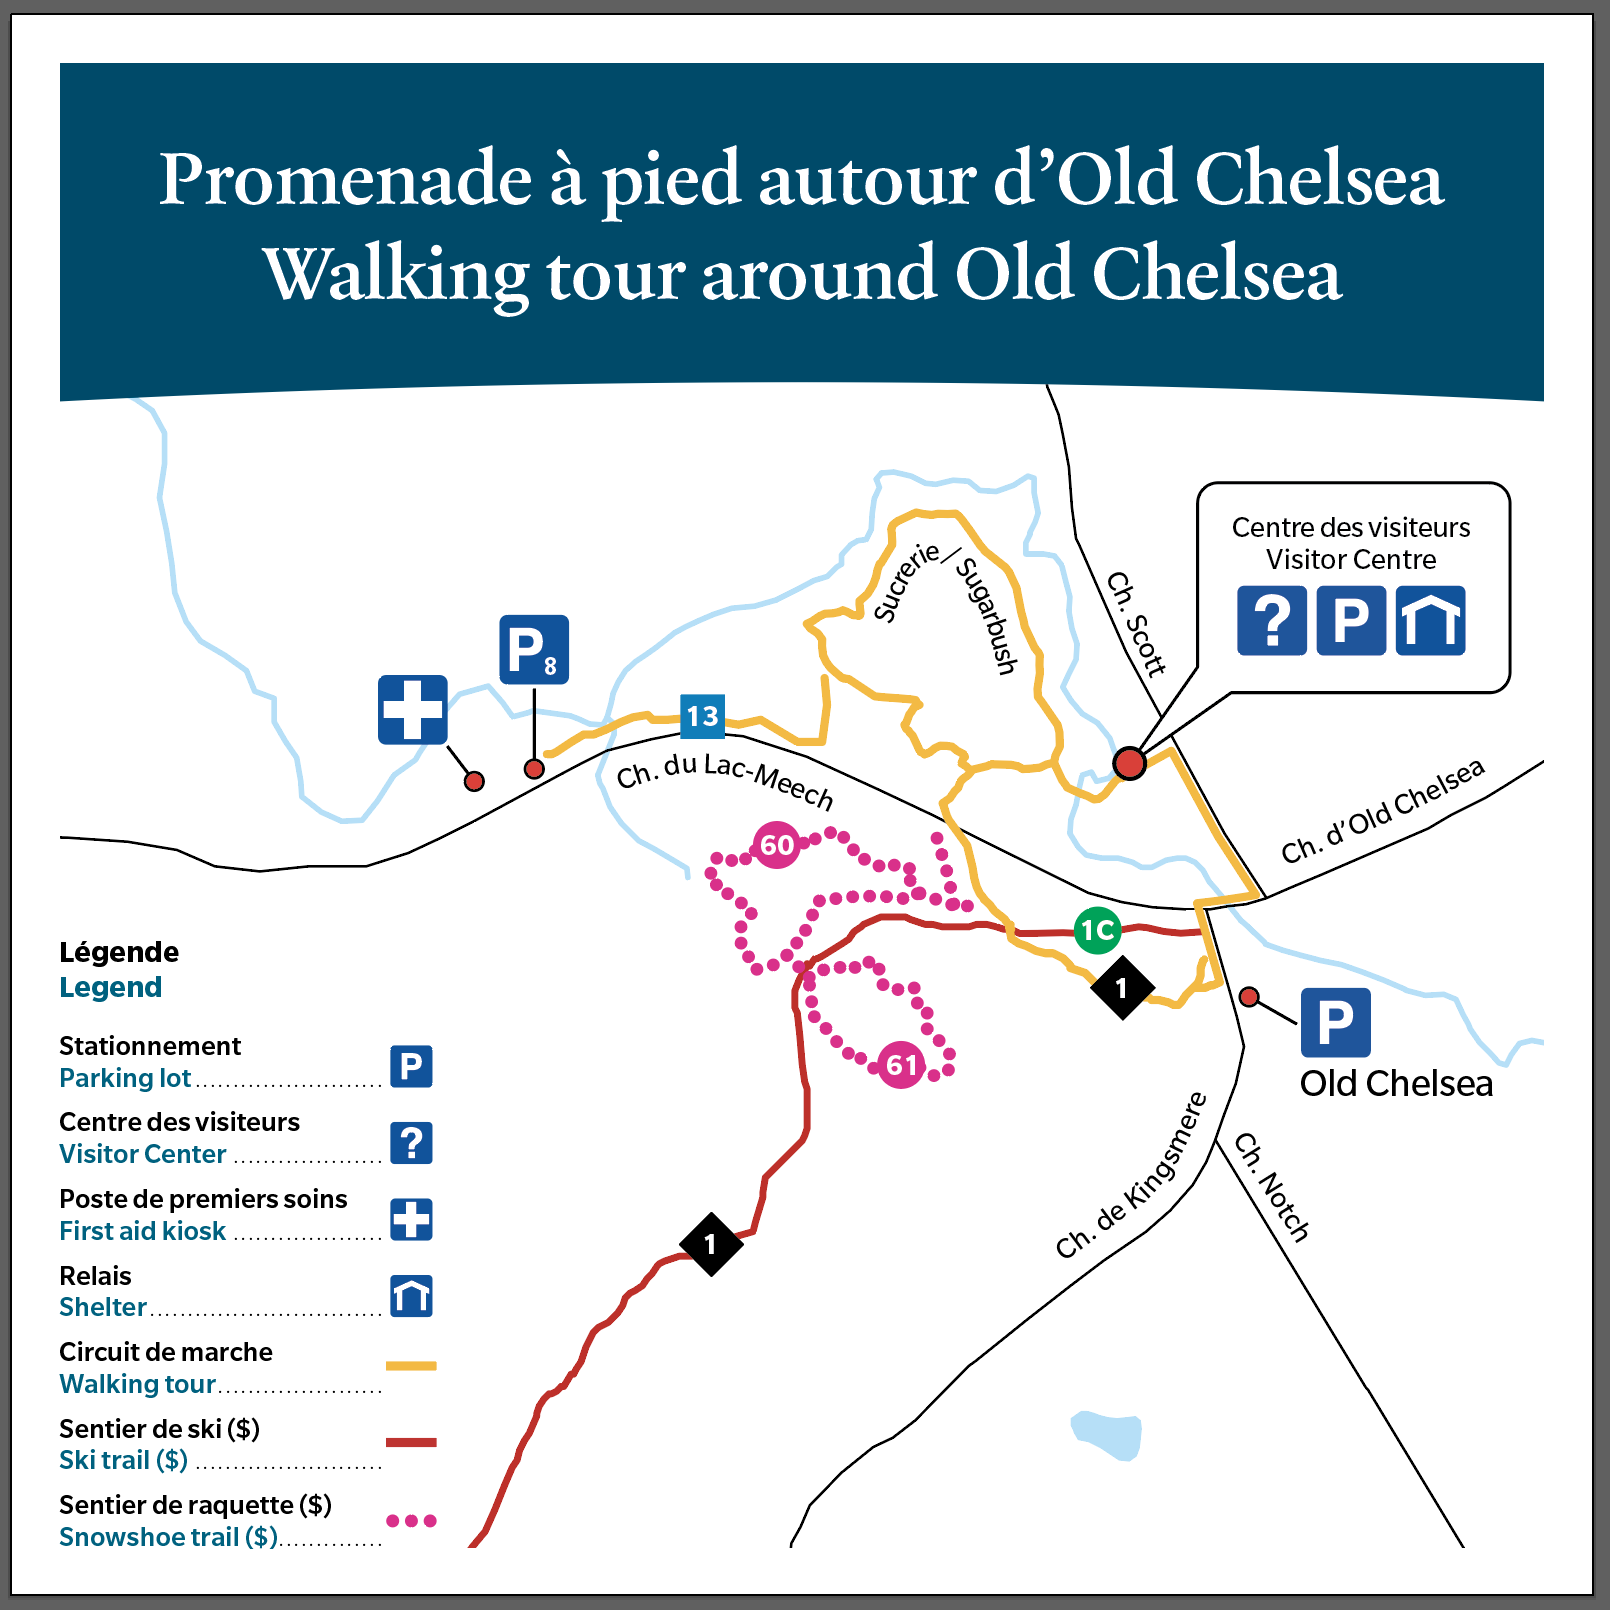 Map showing the walking tour, which includes Trail 13, the Sugarbush Trail, Trail 1 and runs through the village of Old Chelsea (Kingsmere, Old Chelsea and Scott Roads). Start at the parking lot P8, the Visitor Centre or the Old Chelsea parking lot.